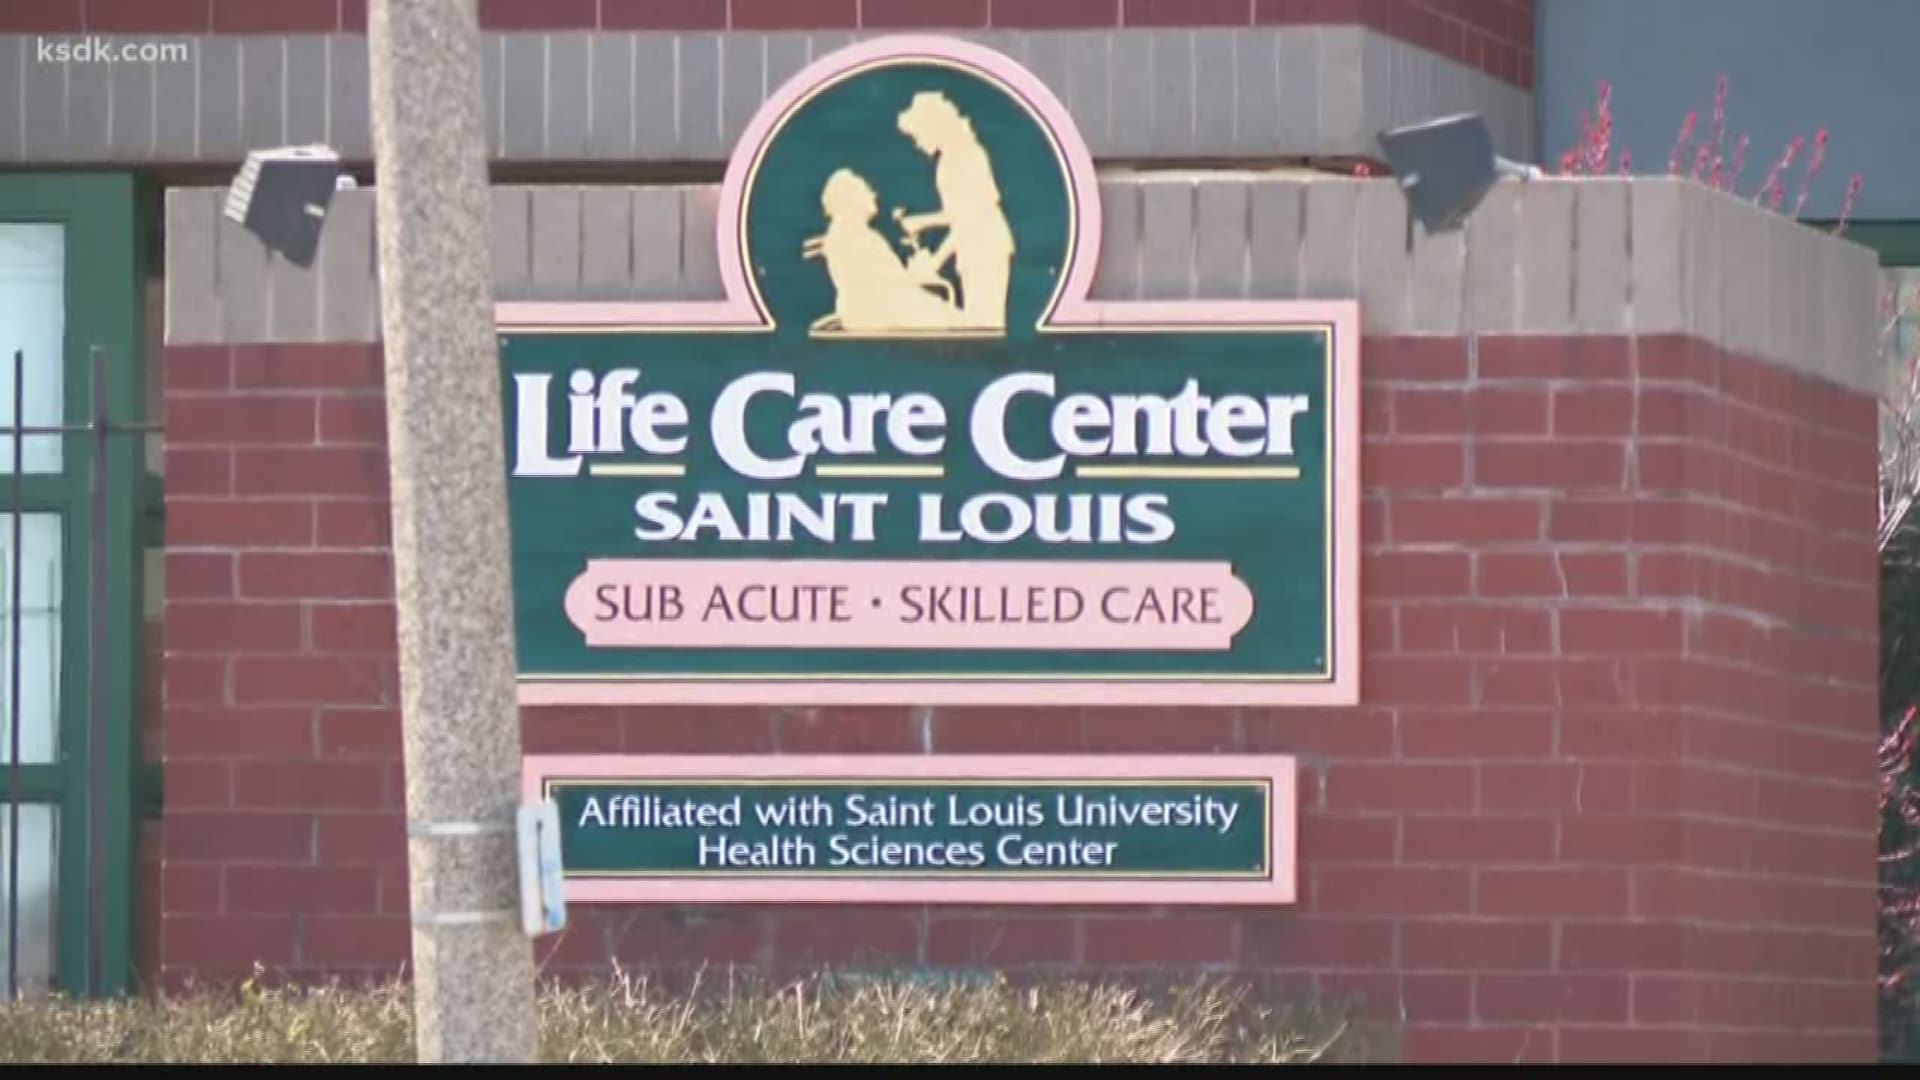 More residents at St. Louis Area nursing homes have tested positive for COVID-19, and medical professionals are worried they won't have enough PPE